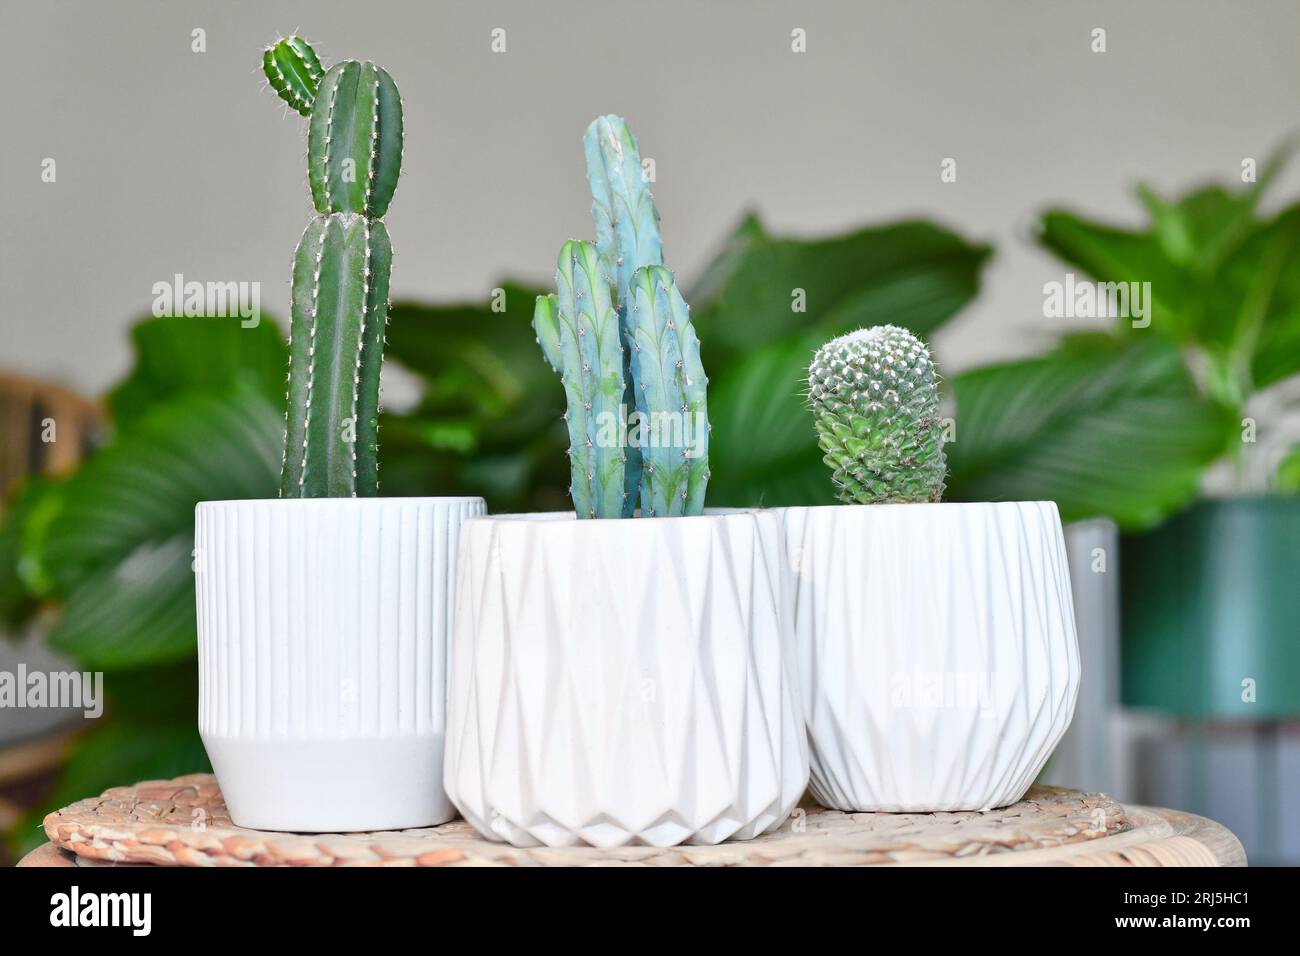 Different small cacti houseplants in flower pots on table in living room Stock Photo